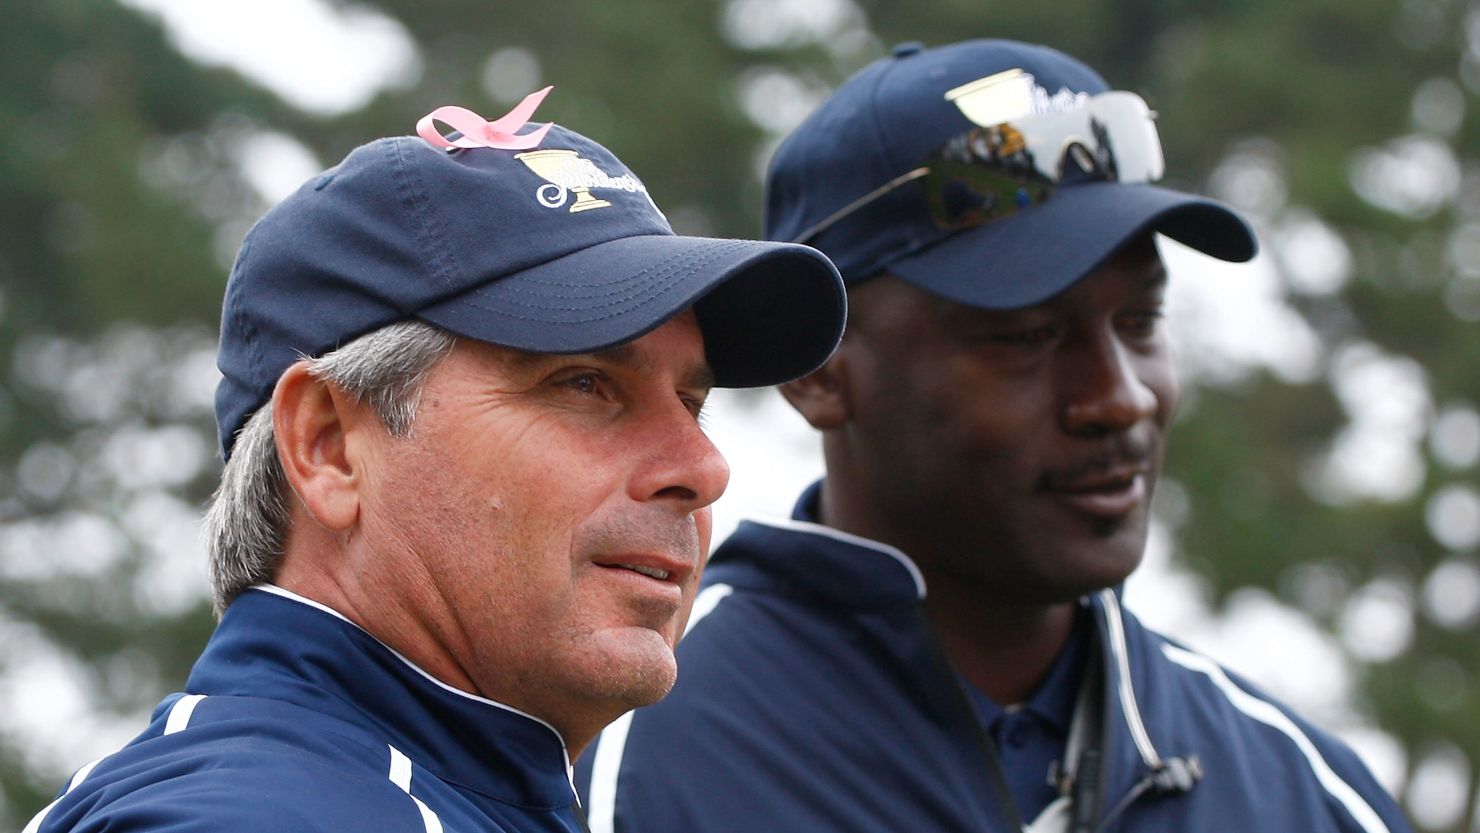 NBA legend Michael Jordan (right) served as Fred Couples' assistant for the 2009 tournament in California.